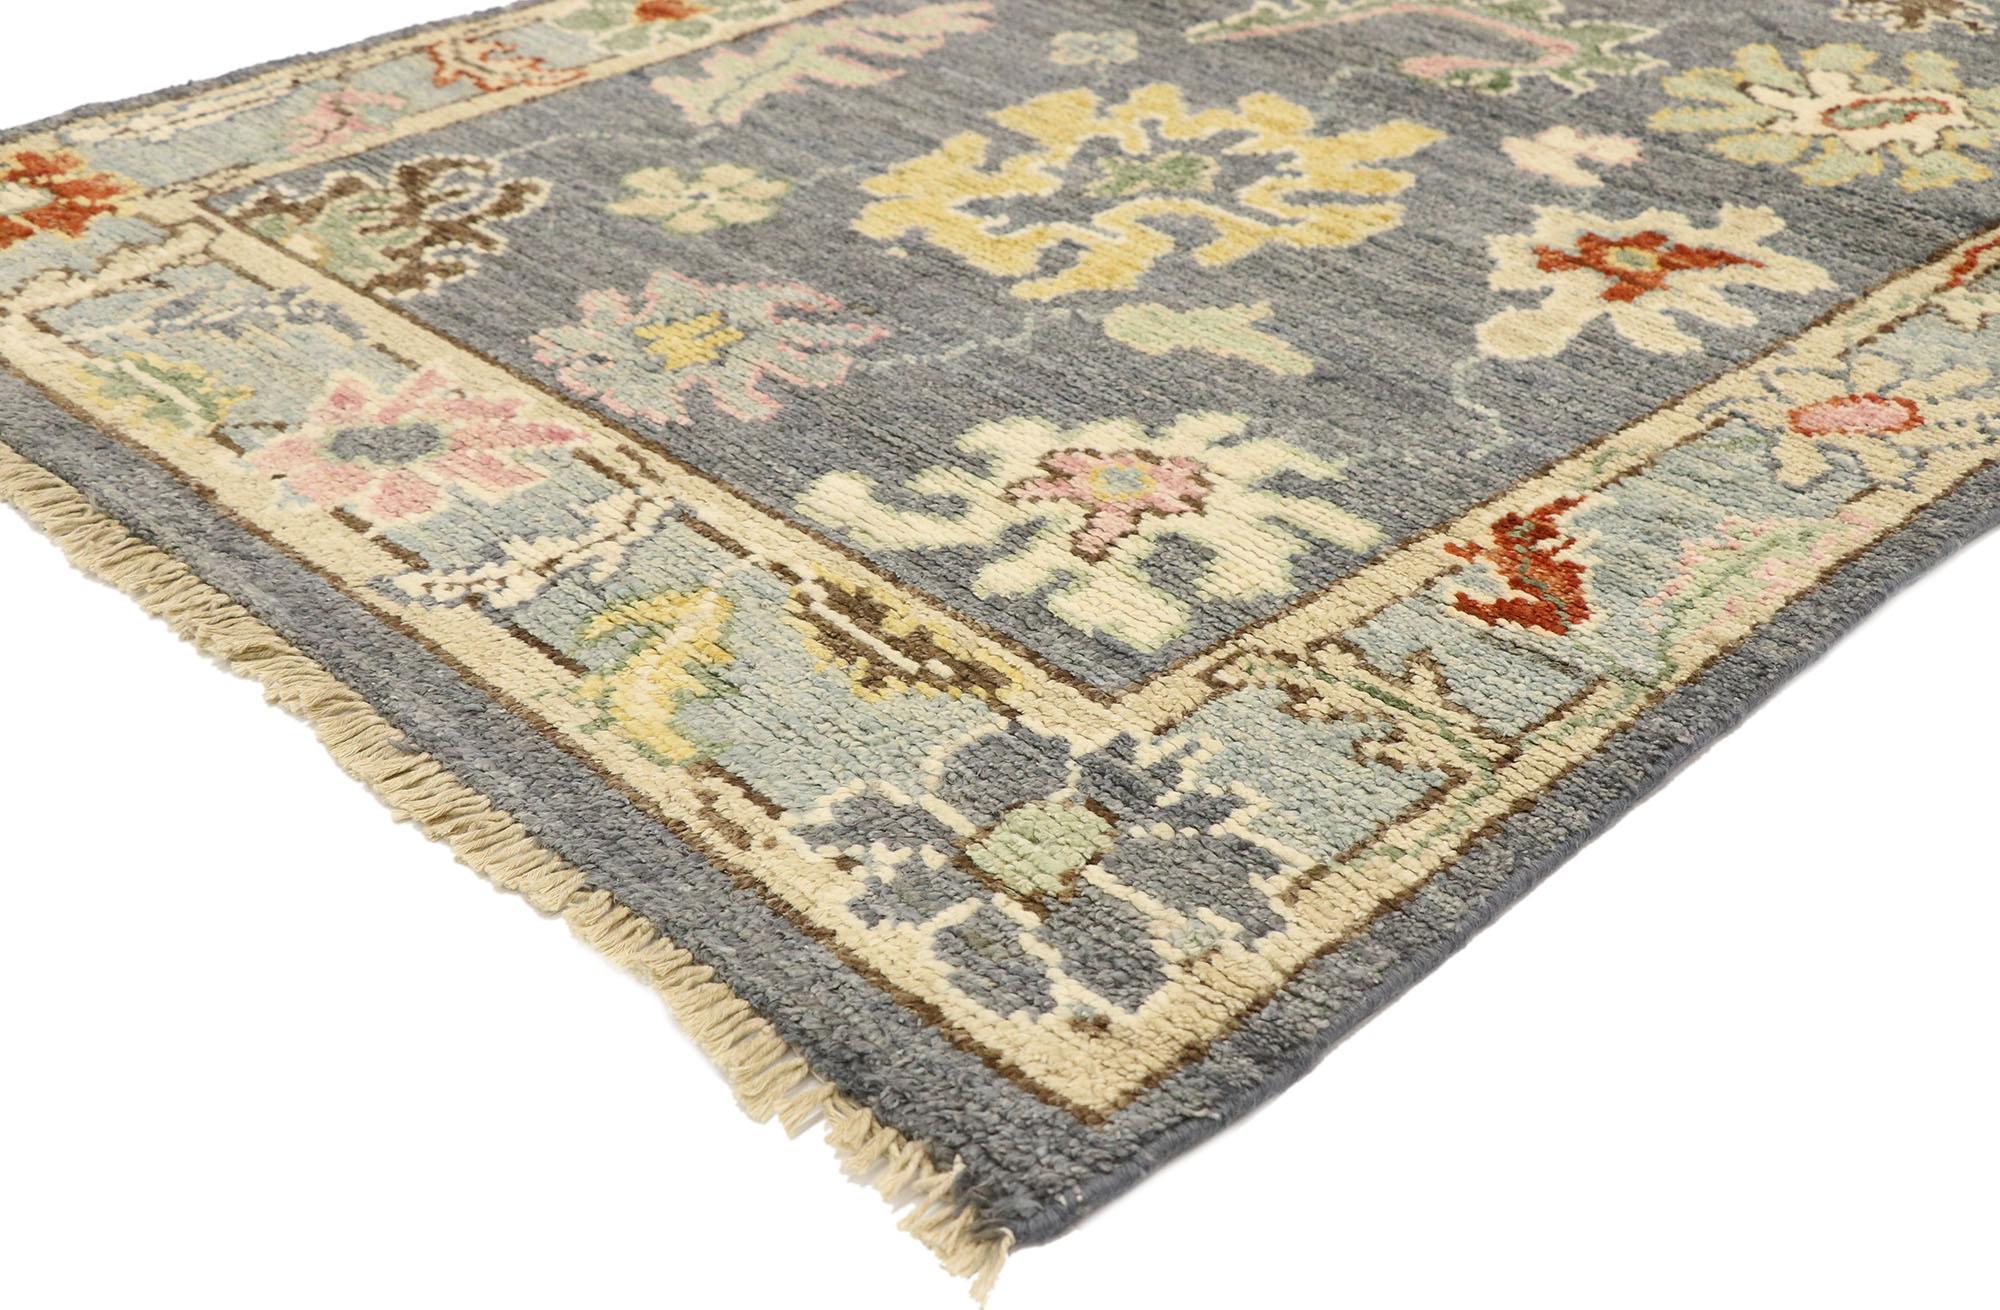 80390 New Modern Colorful Oushak Rug, 03'07 x 06'01. Exuding a stylish complexity and a highly decorative aesthetic, this hand knotted wool Oushak rug epitomizes traditional style with a modern twist. Its exquisitely balanced designs and gentle